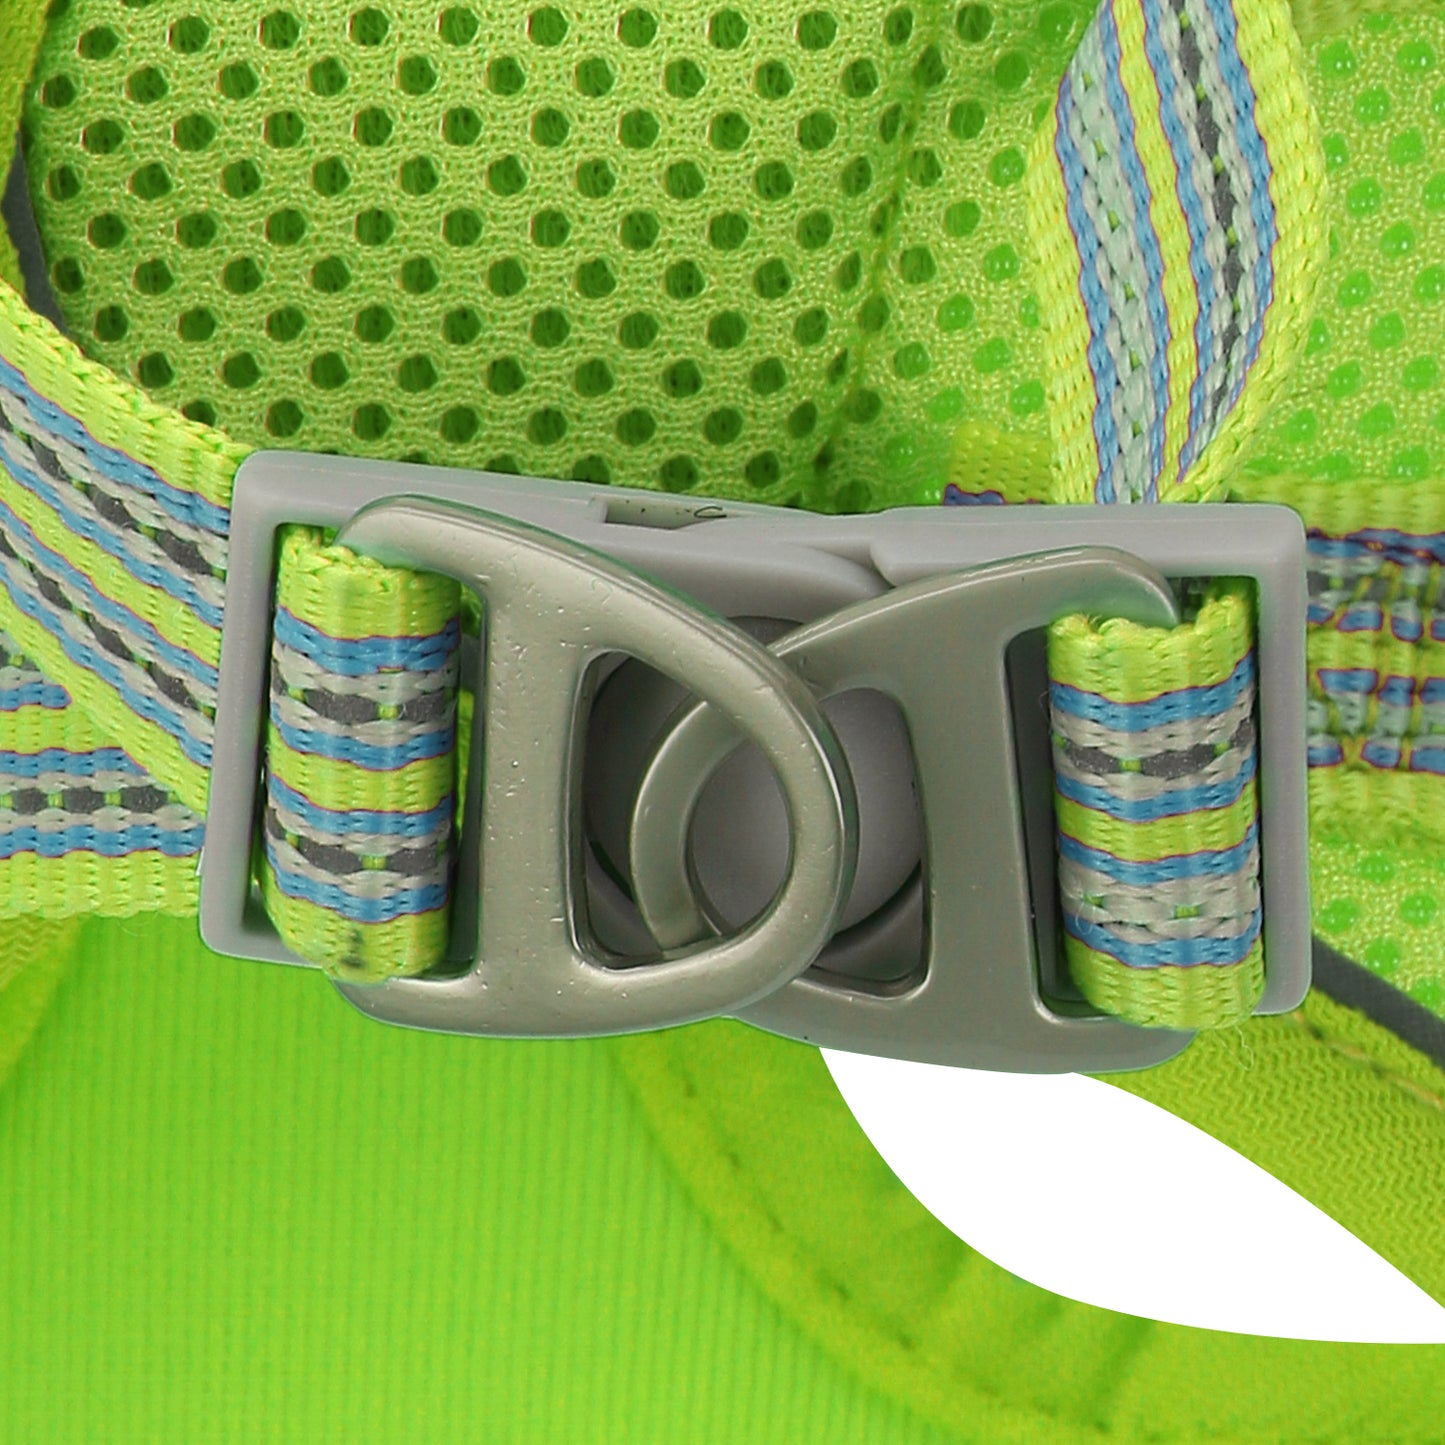 BASIL Soft Adjustable Mesh Harness for Puppies & Small Breed Dogs (Neon Yellow)